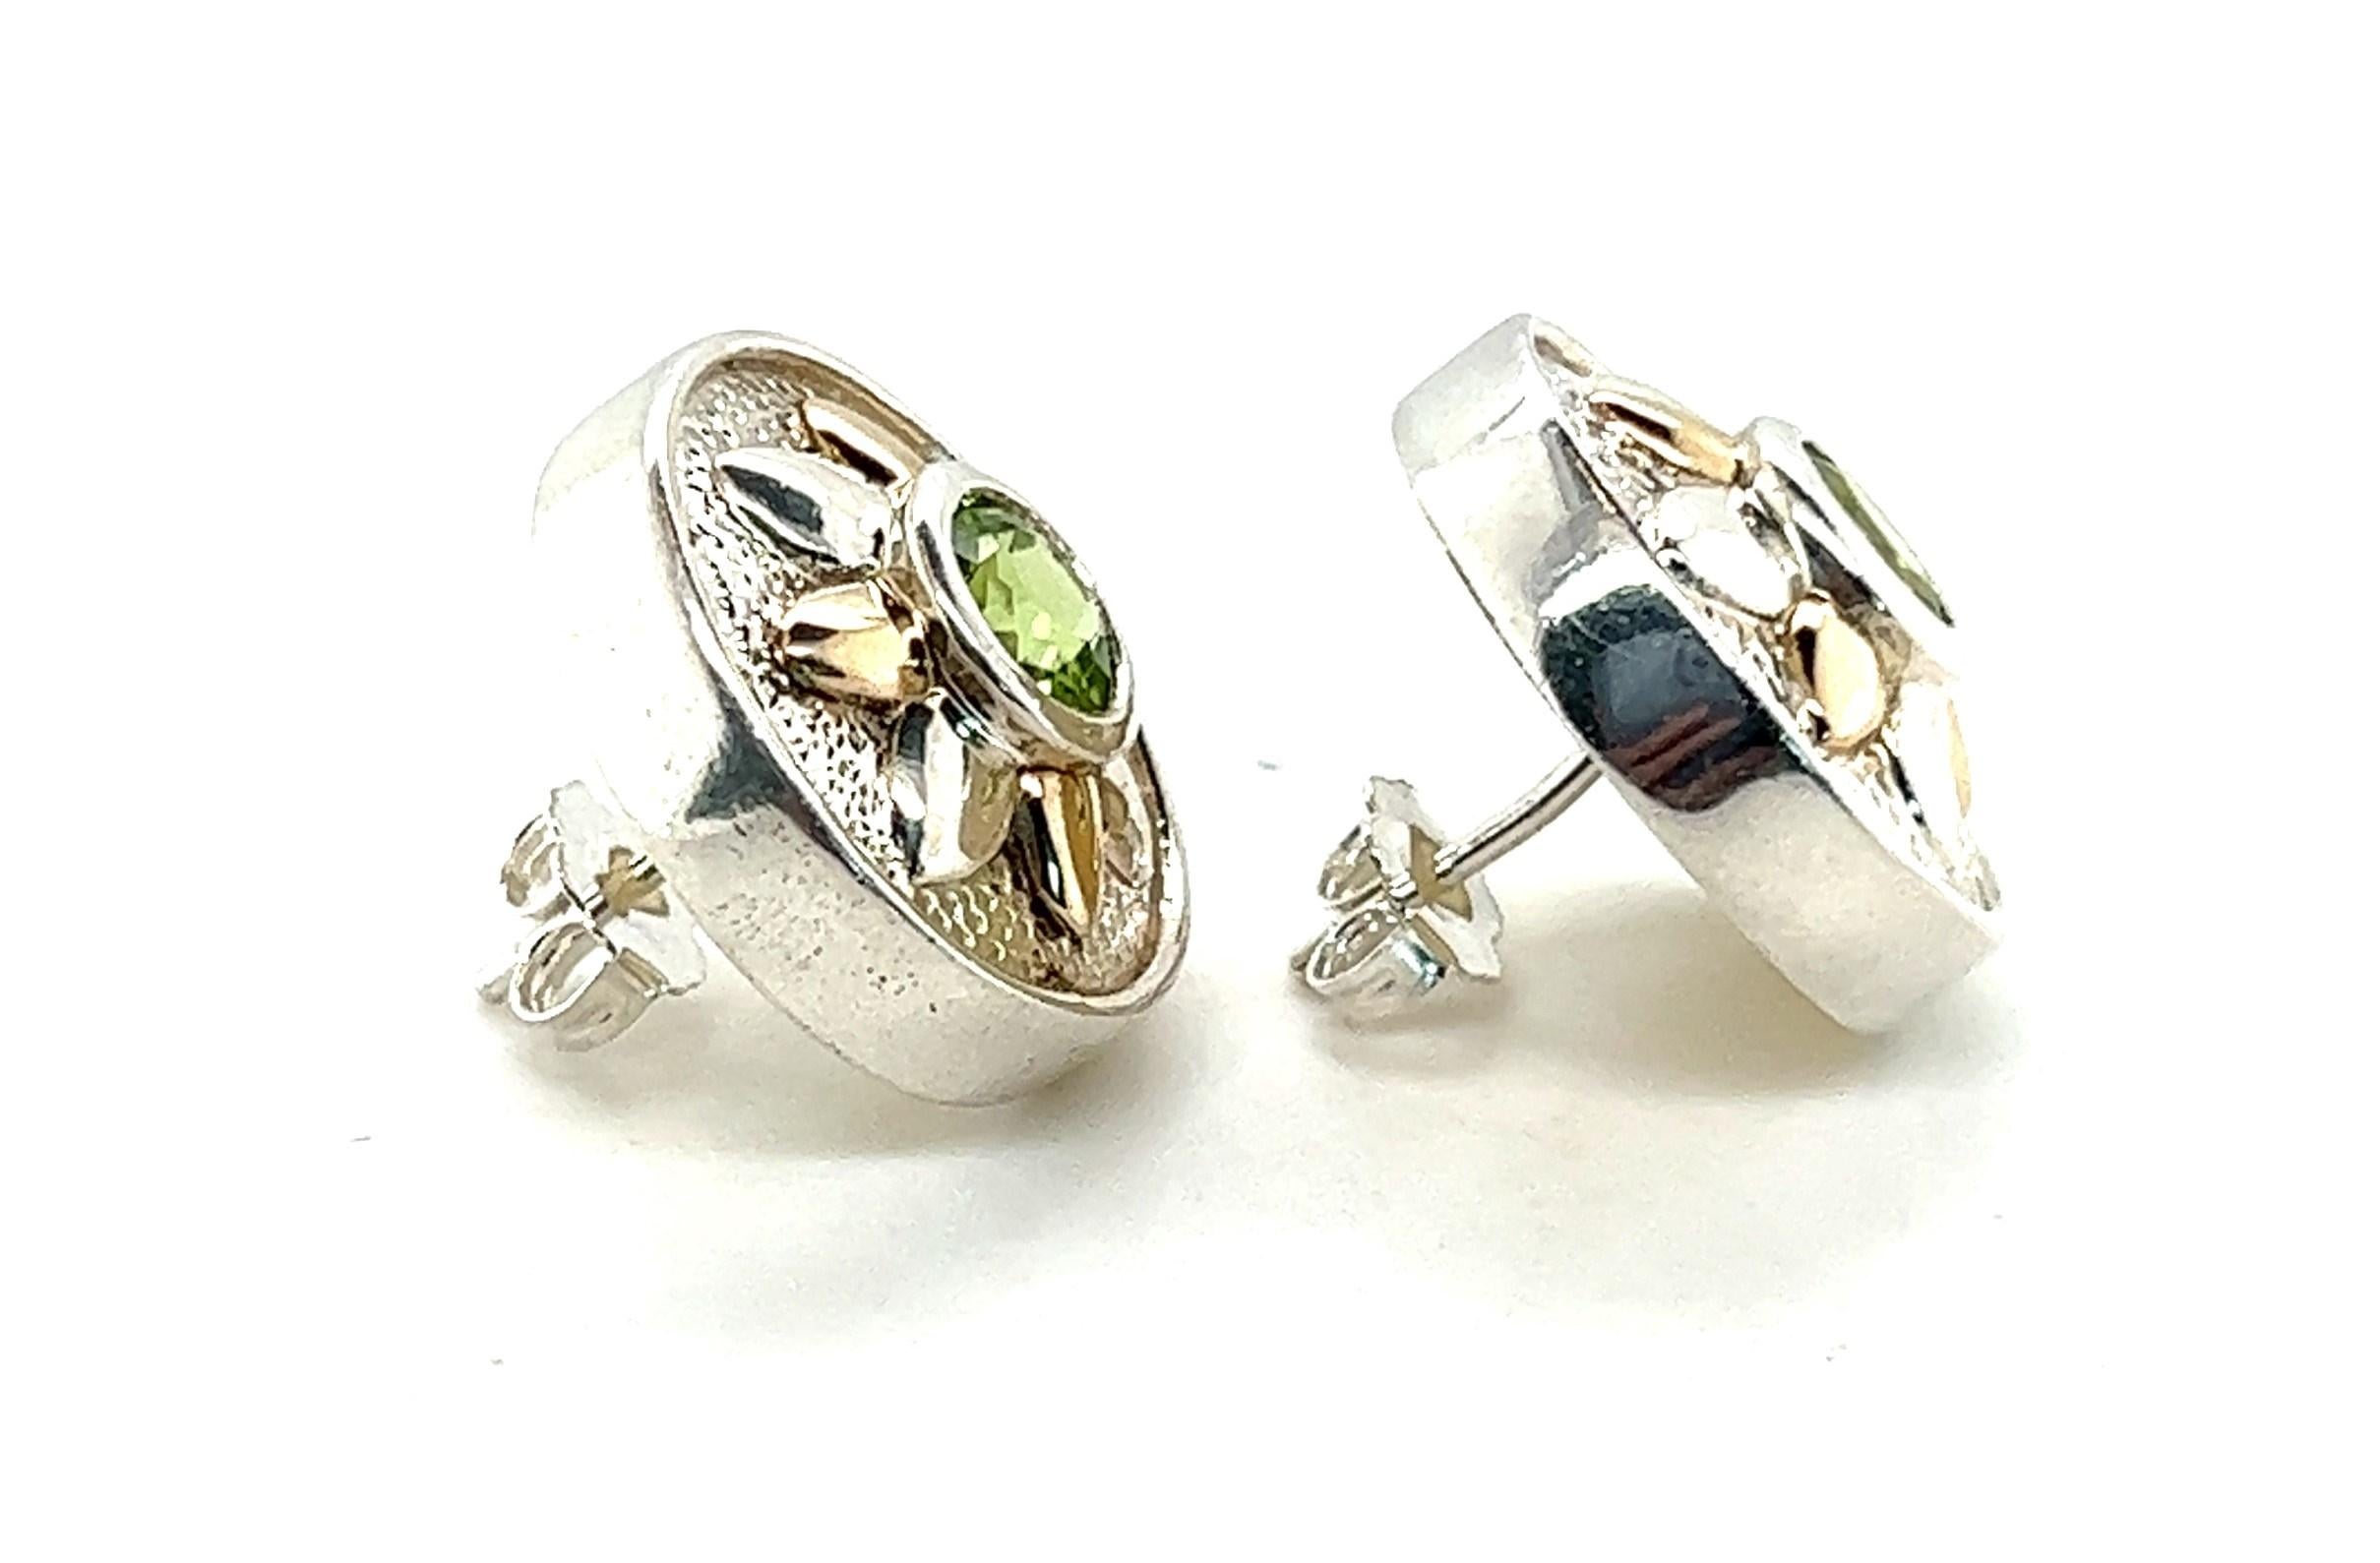 What do you get the August baby who has everything? These earrings, of course!

Sterling Silver and 14kt yellow gold stud earrings shaped like a circle with alternating silver and gold flower petals surrounding a bezel set peridot in the center. The